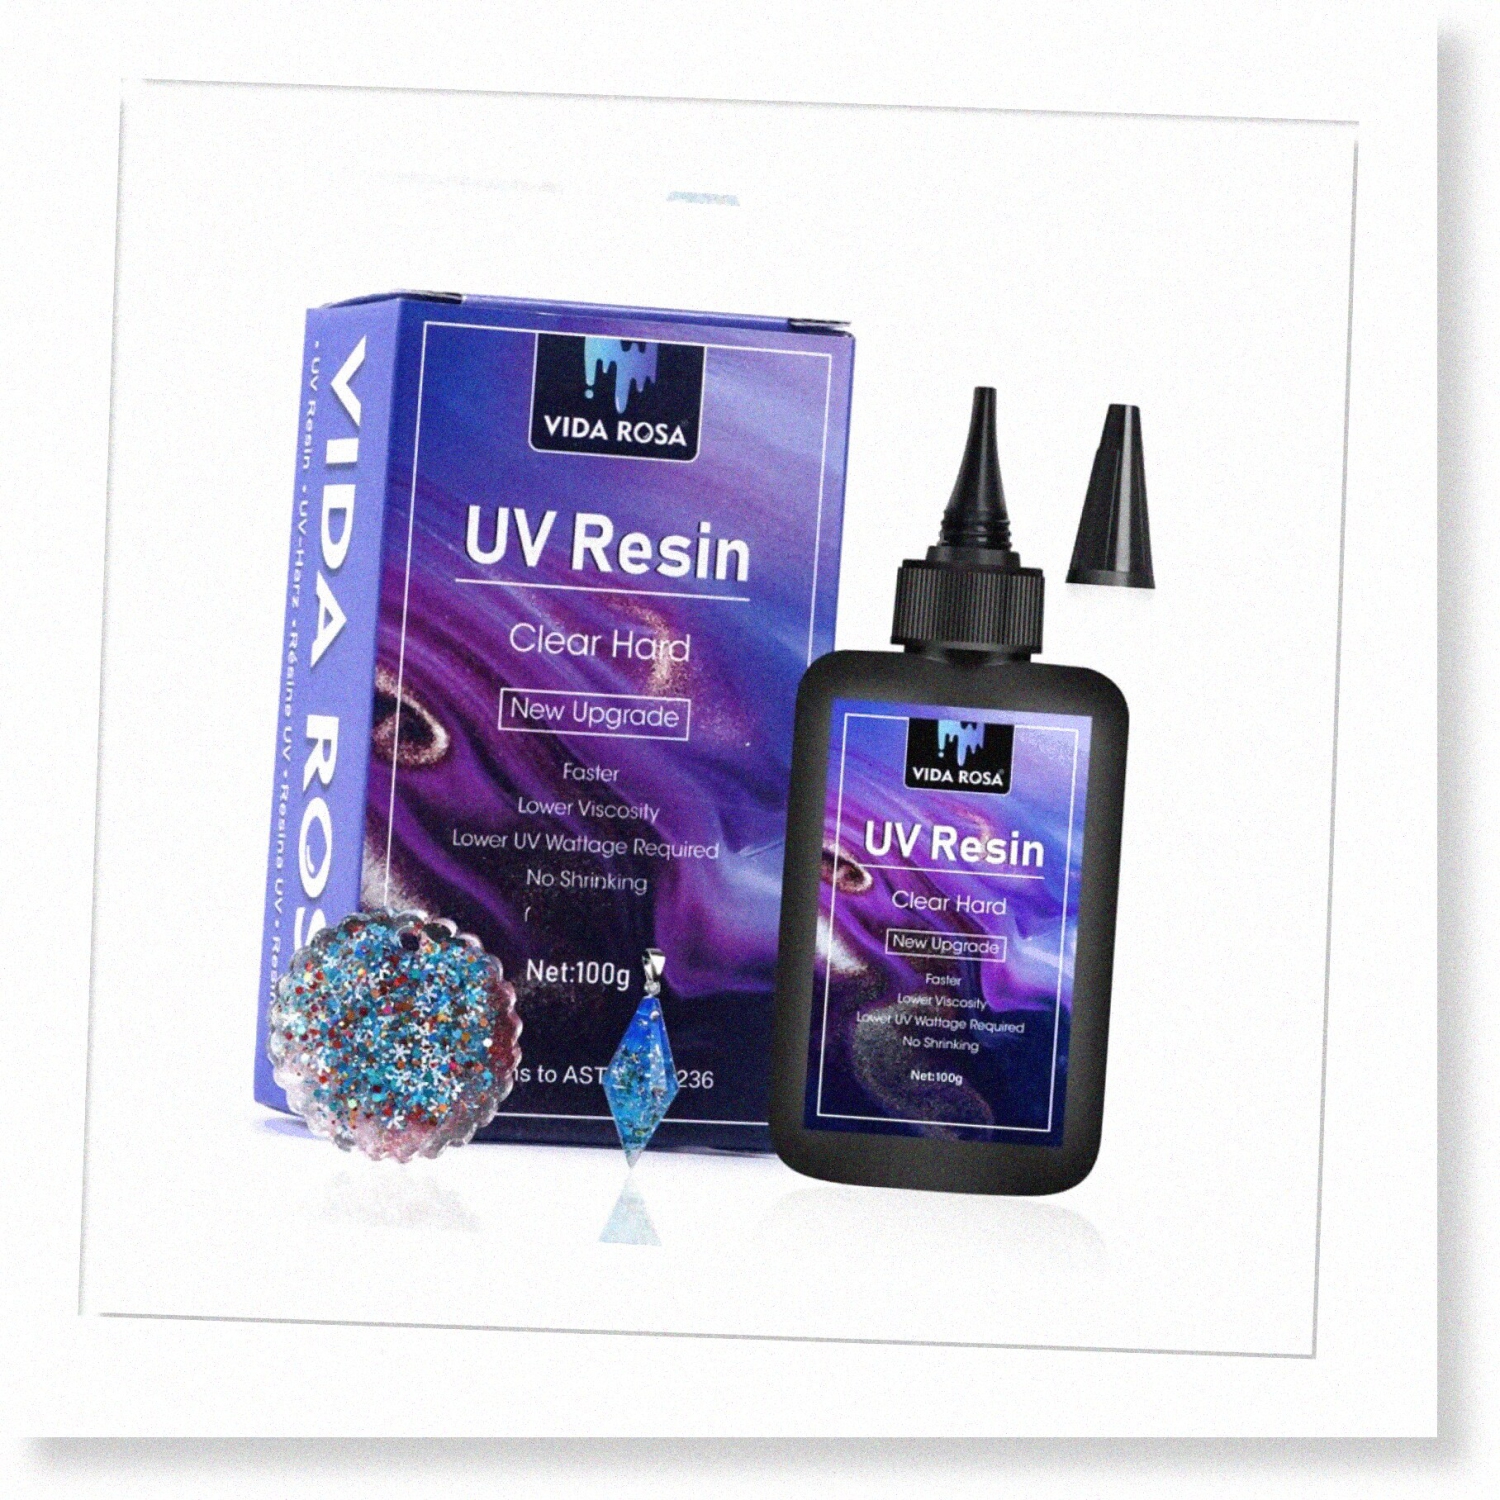 Crystal Clear UV Resin - VIDA ROSA: Hard Epoxy for Jewelry Making, Art Pendants, Earrings, Necklaces, Bracelets, Nail Art Accessories. 100g Ultraviolet Curing Solution.